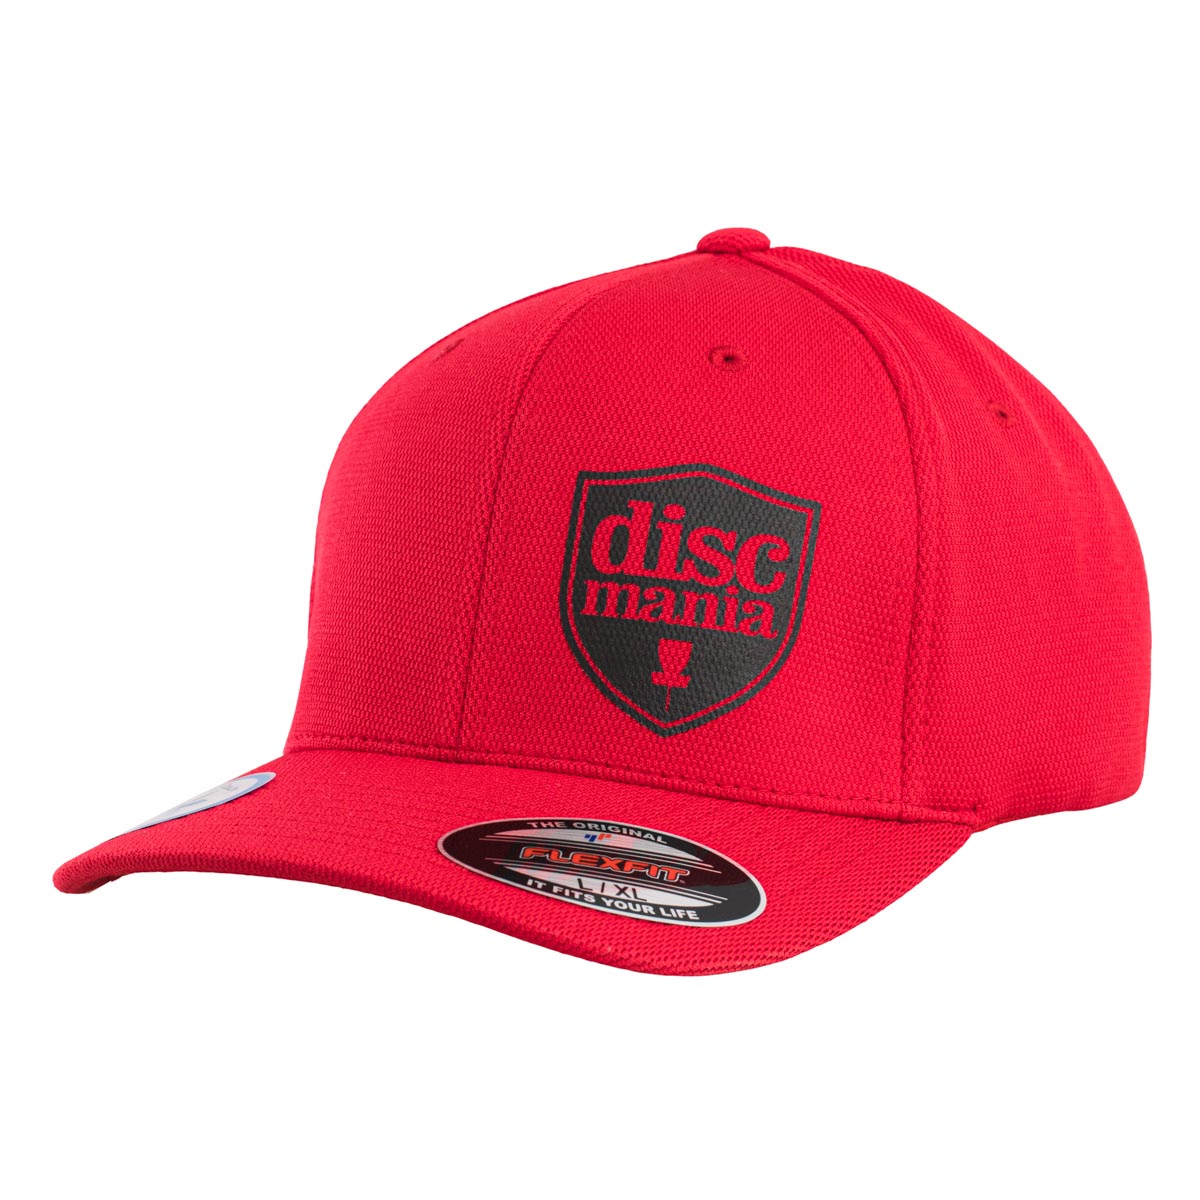 Discmania Shield Cool and Dry Flexfit Hat